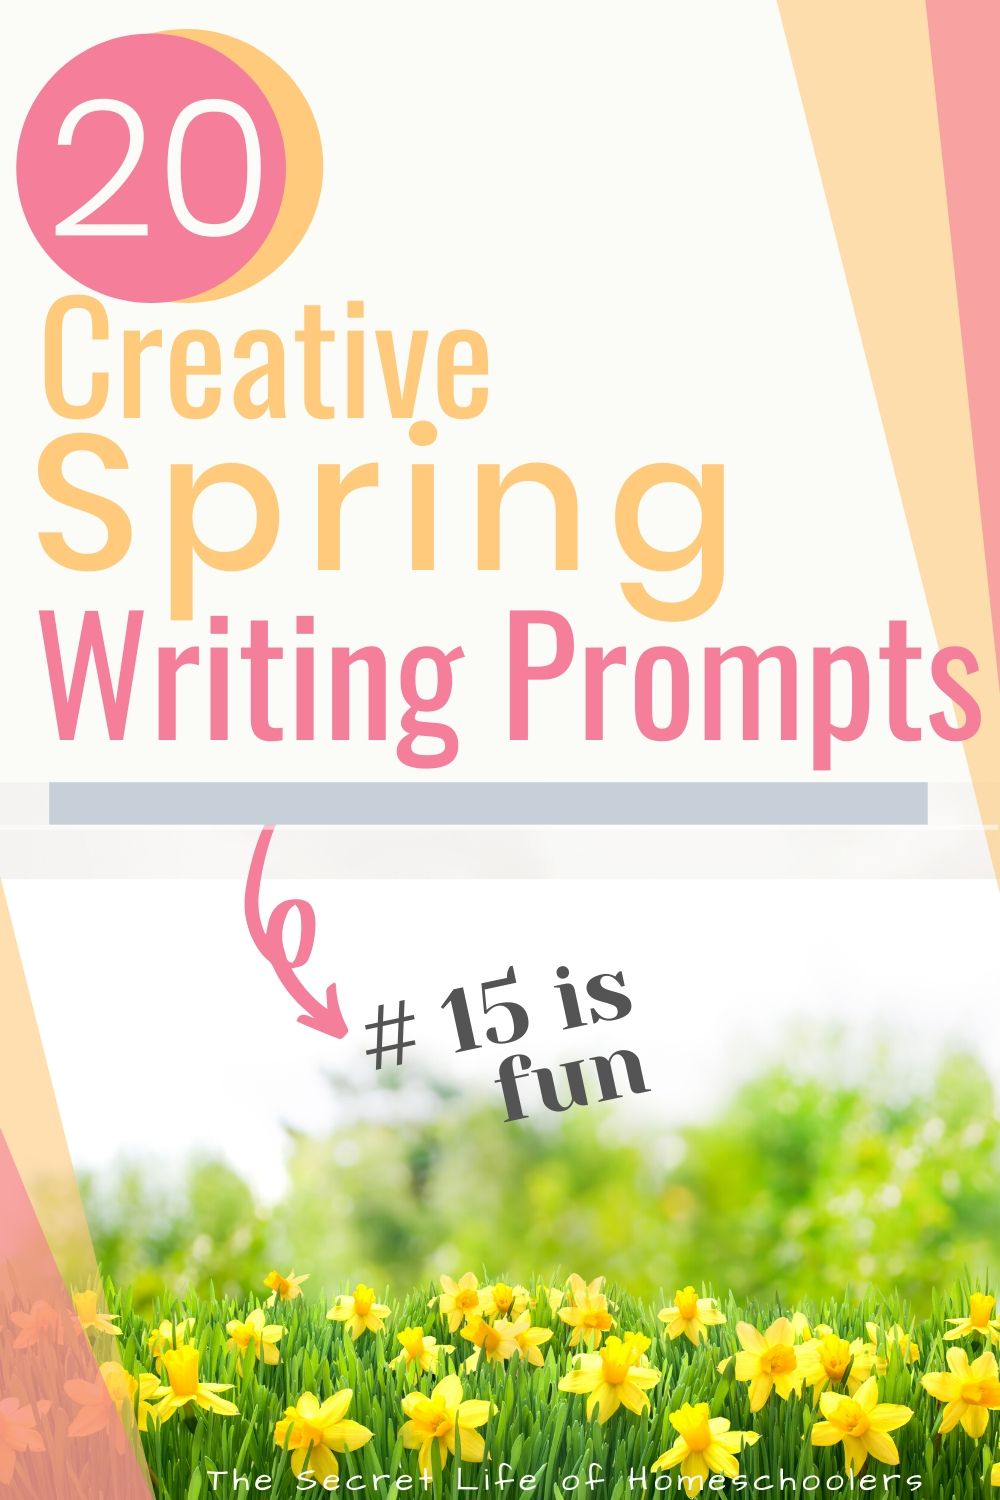 how to describe spring in creative writing